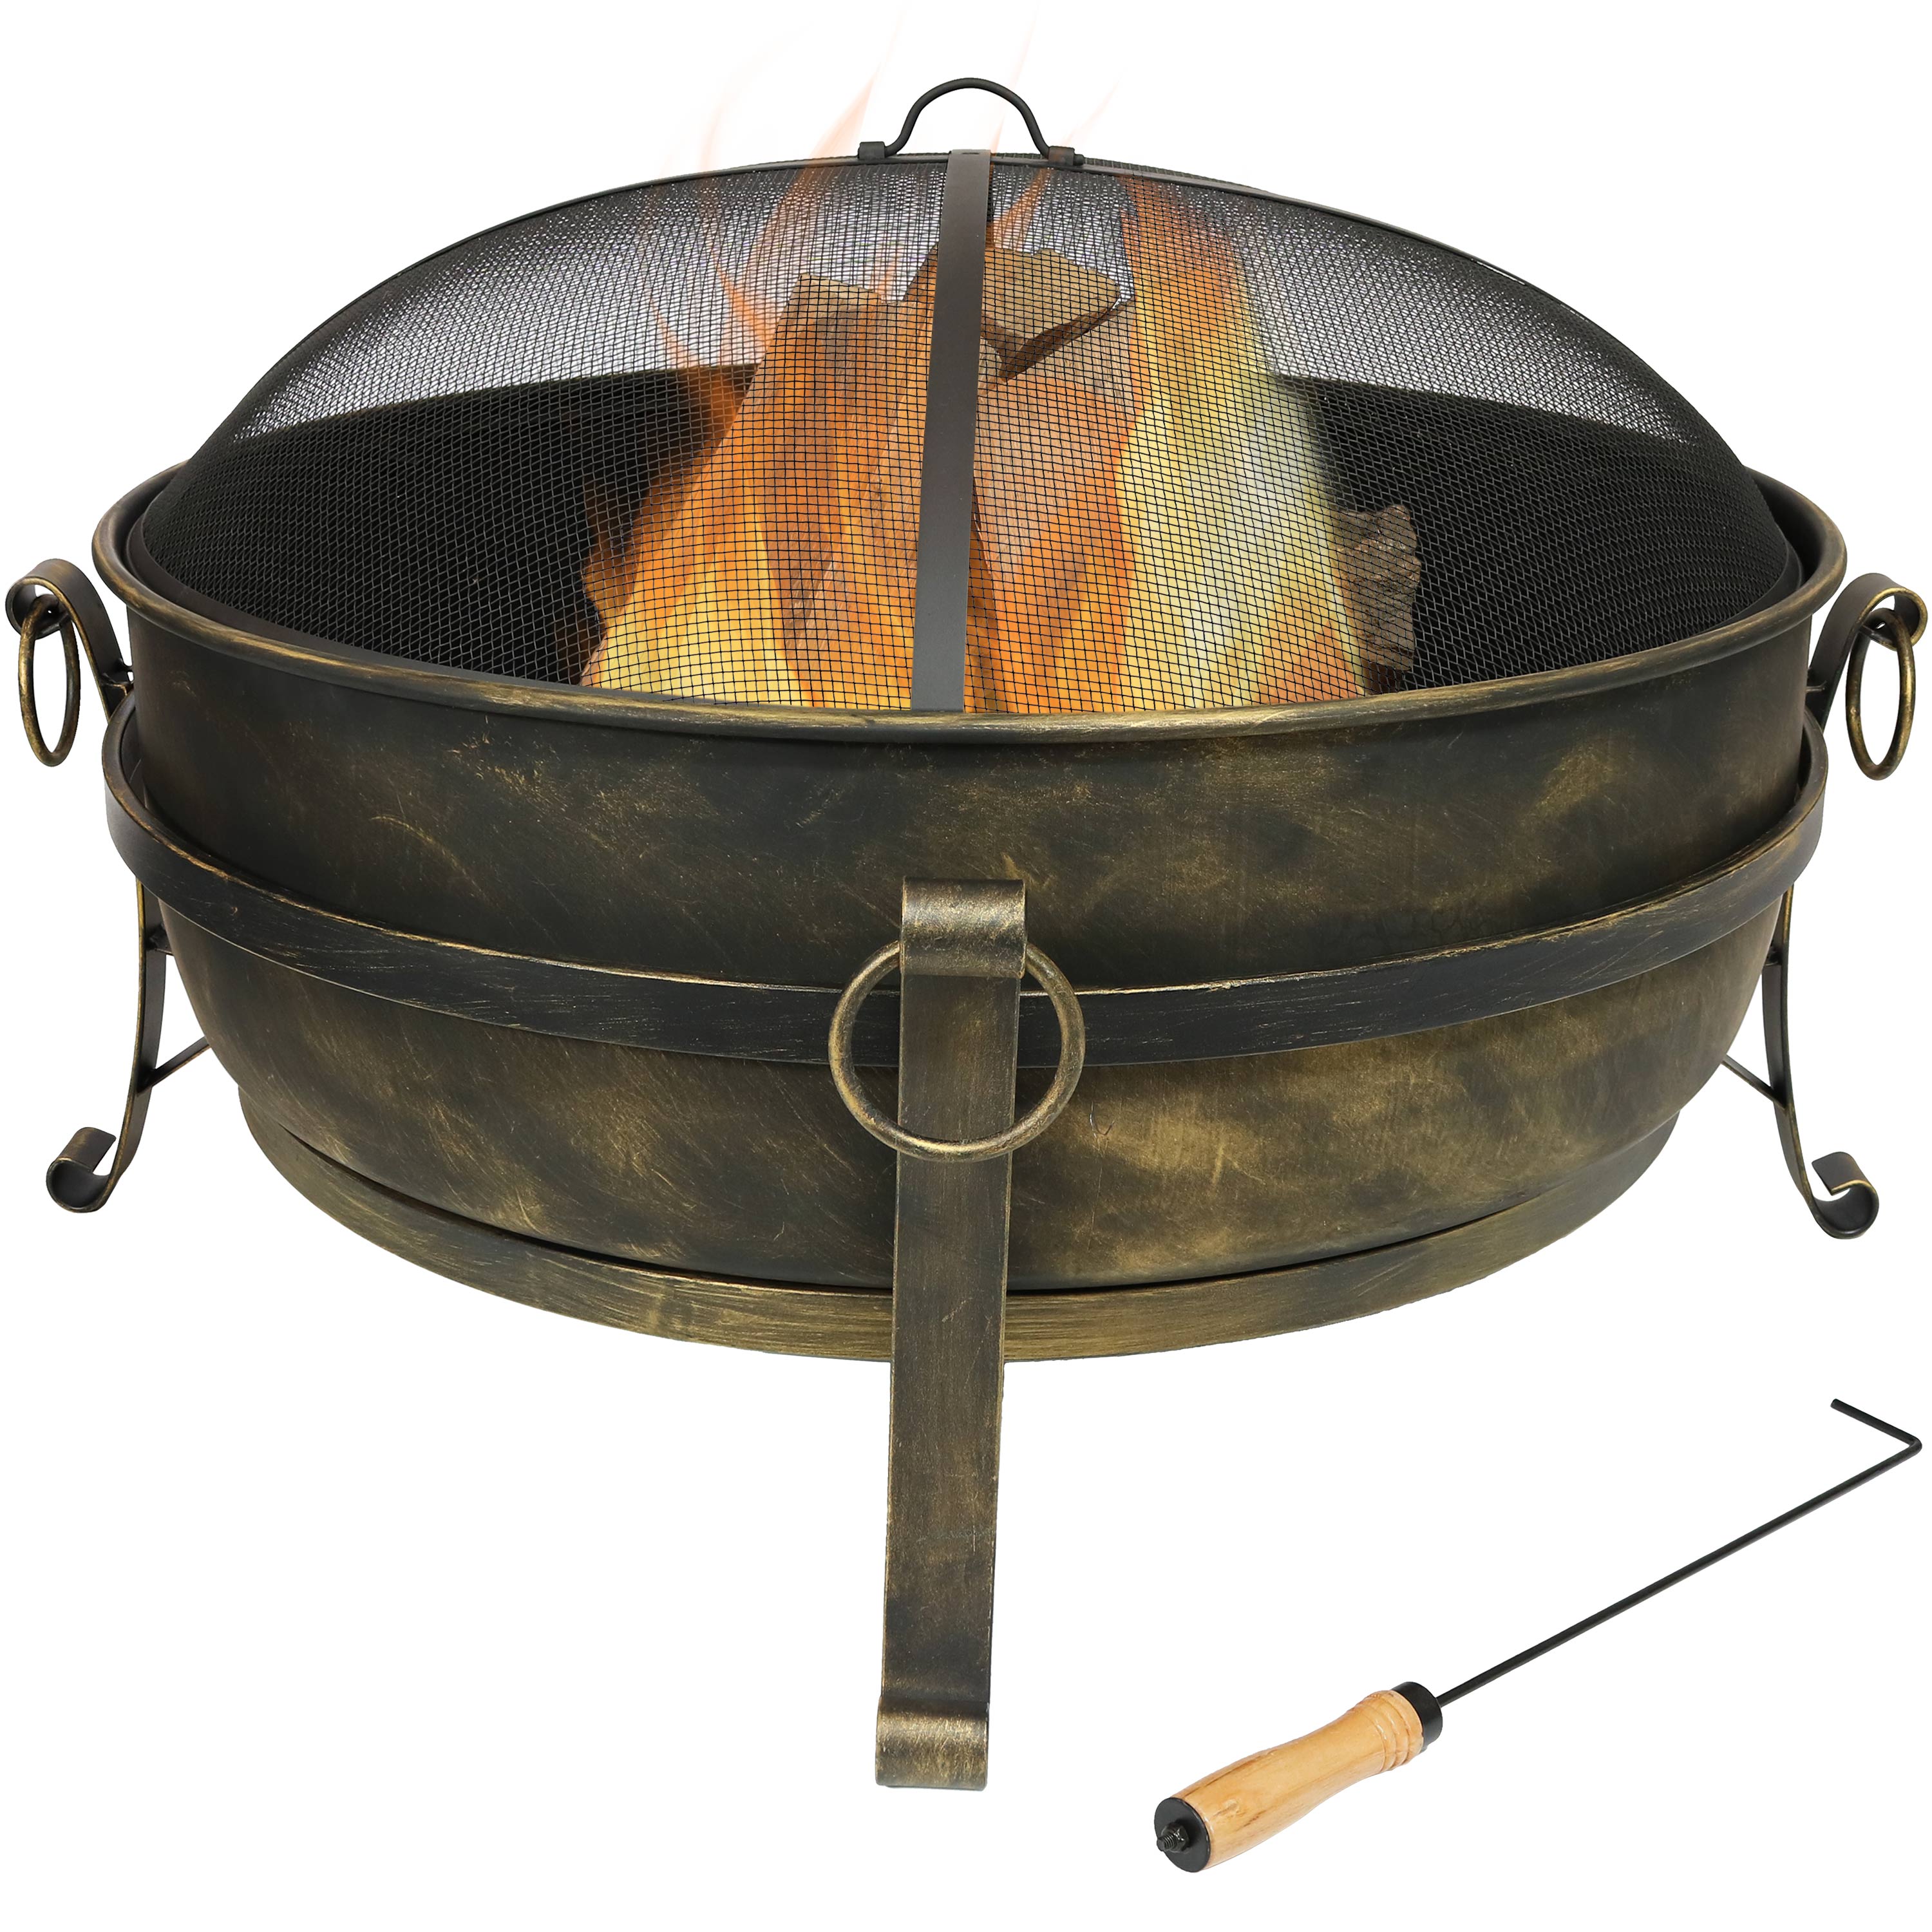 Sunnydaze Large Outdoor Cauldron Fire Pit with Spark Screen - 34" - image 1 of 9